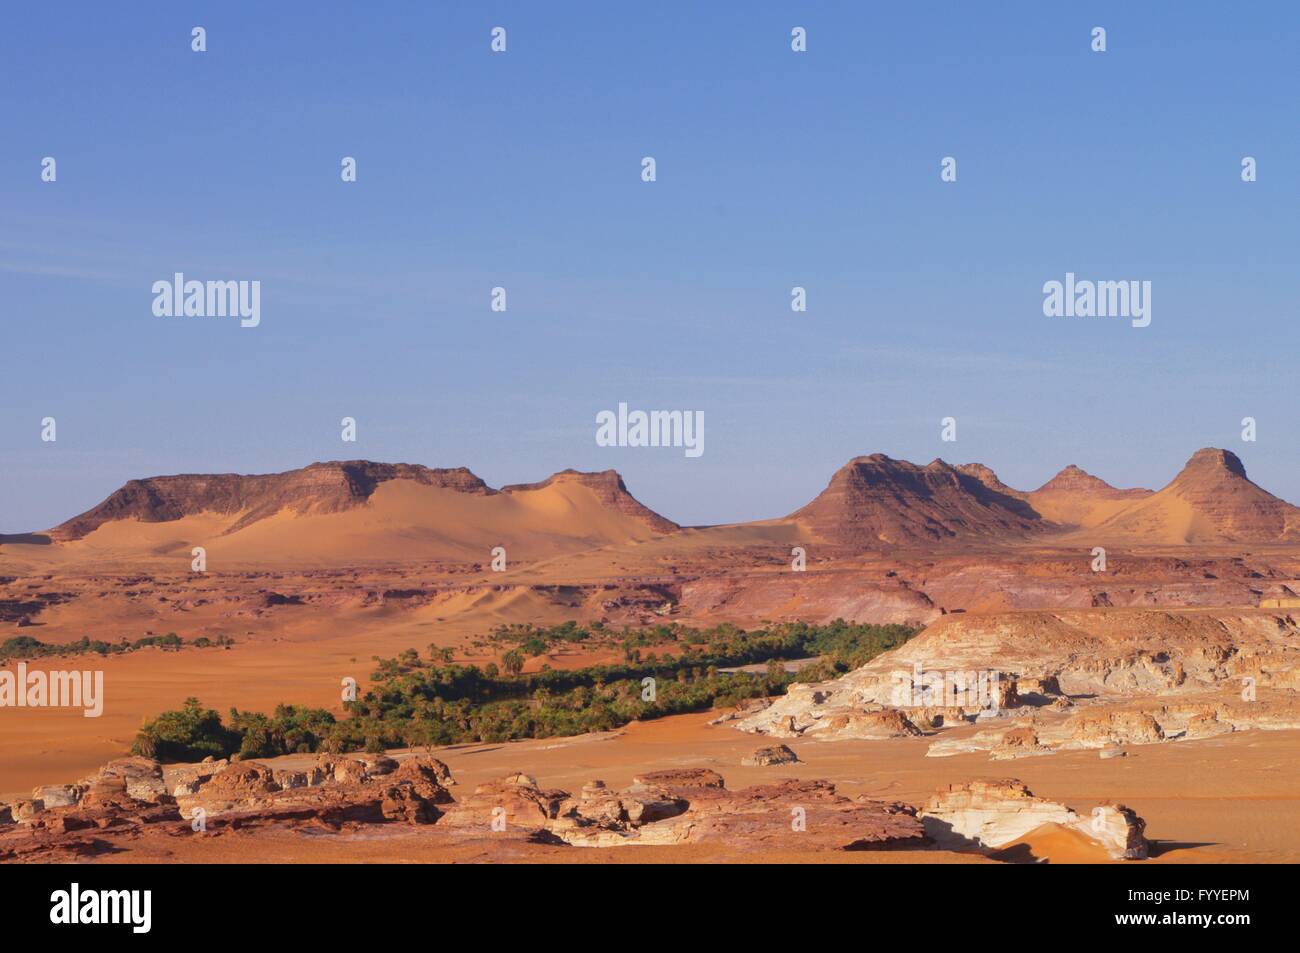 Degedei, a salt-oasis in the Sahara desert in the Ouanianga region - 26 October 2012 Stock Photo